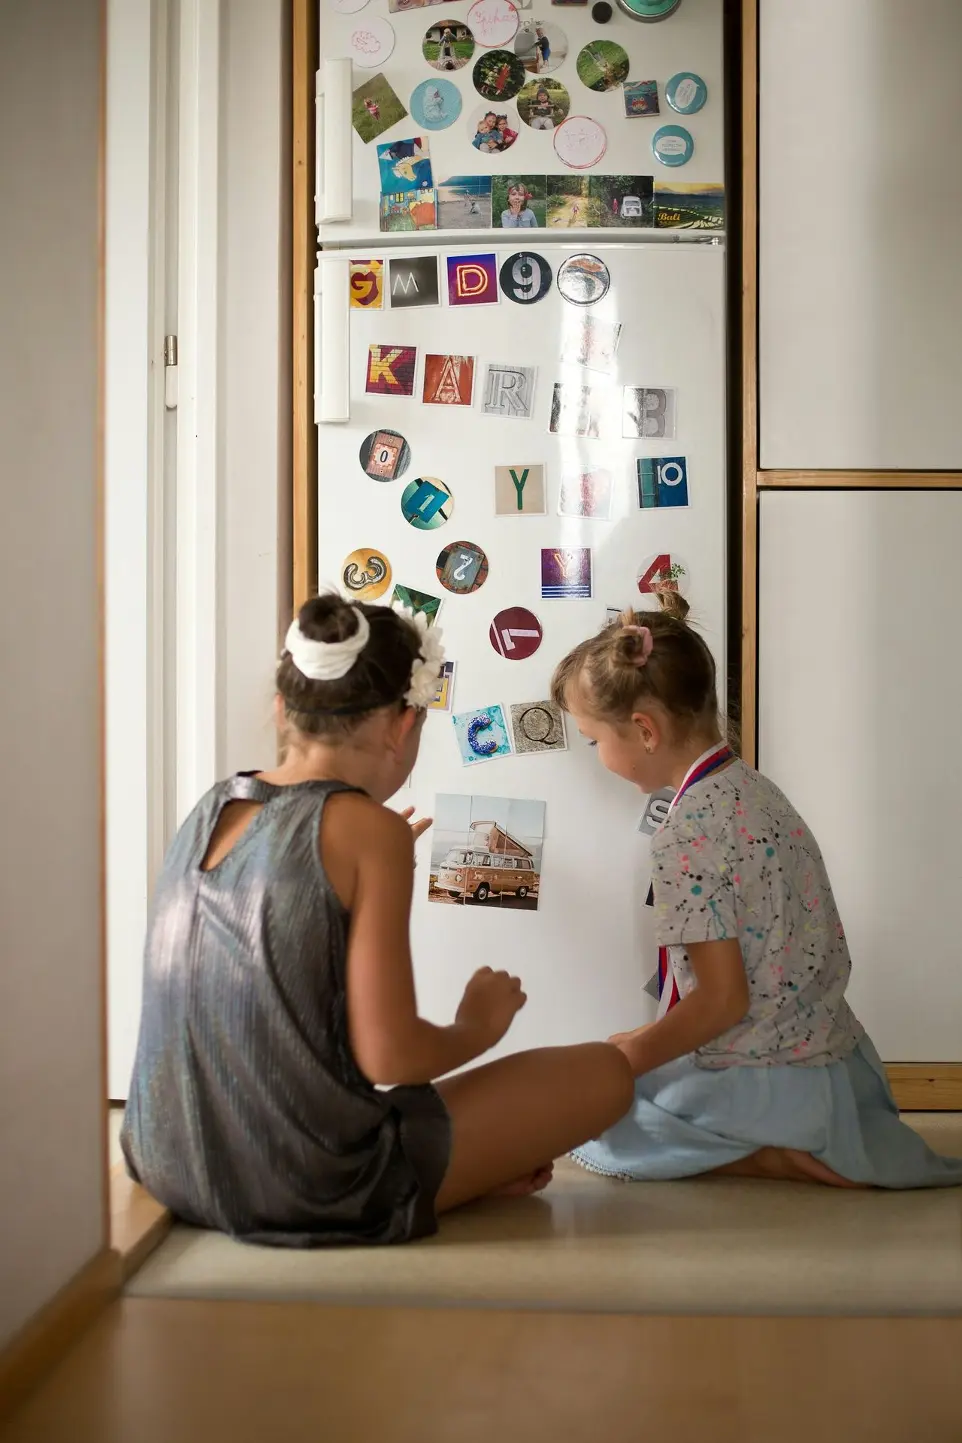 two young girls sitting on the floor looking at a refrigerator